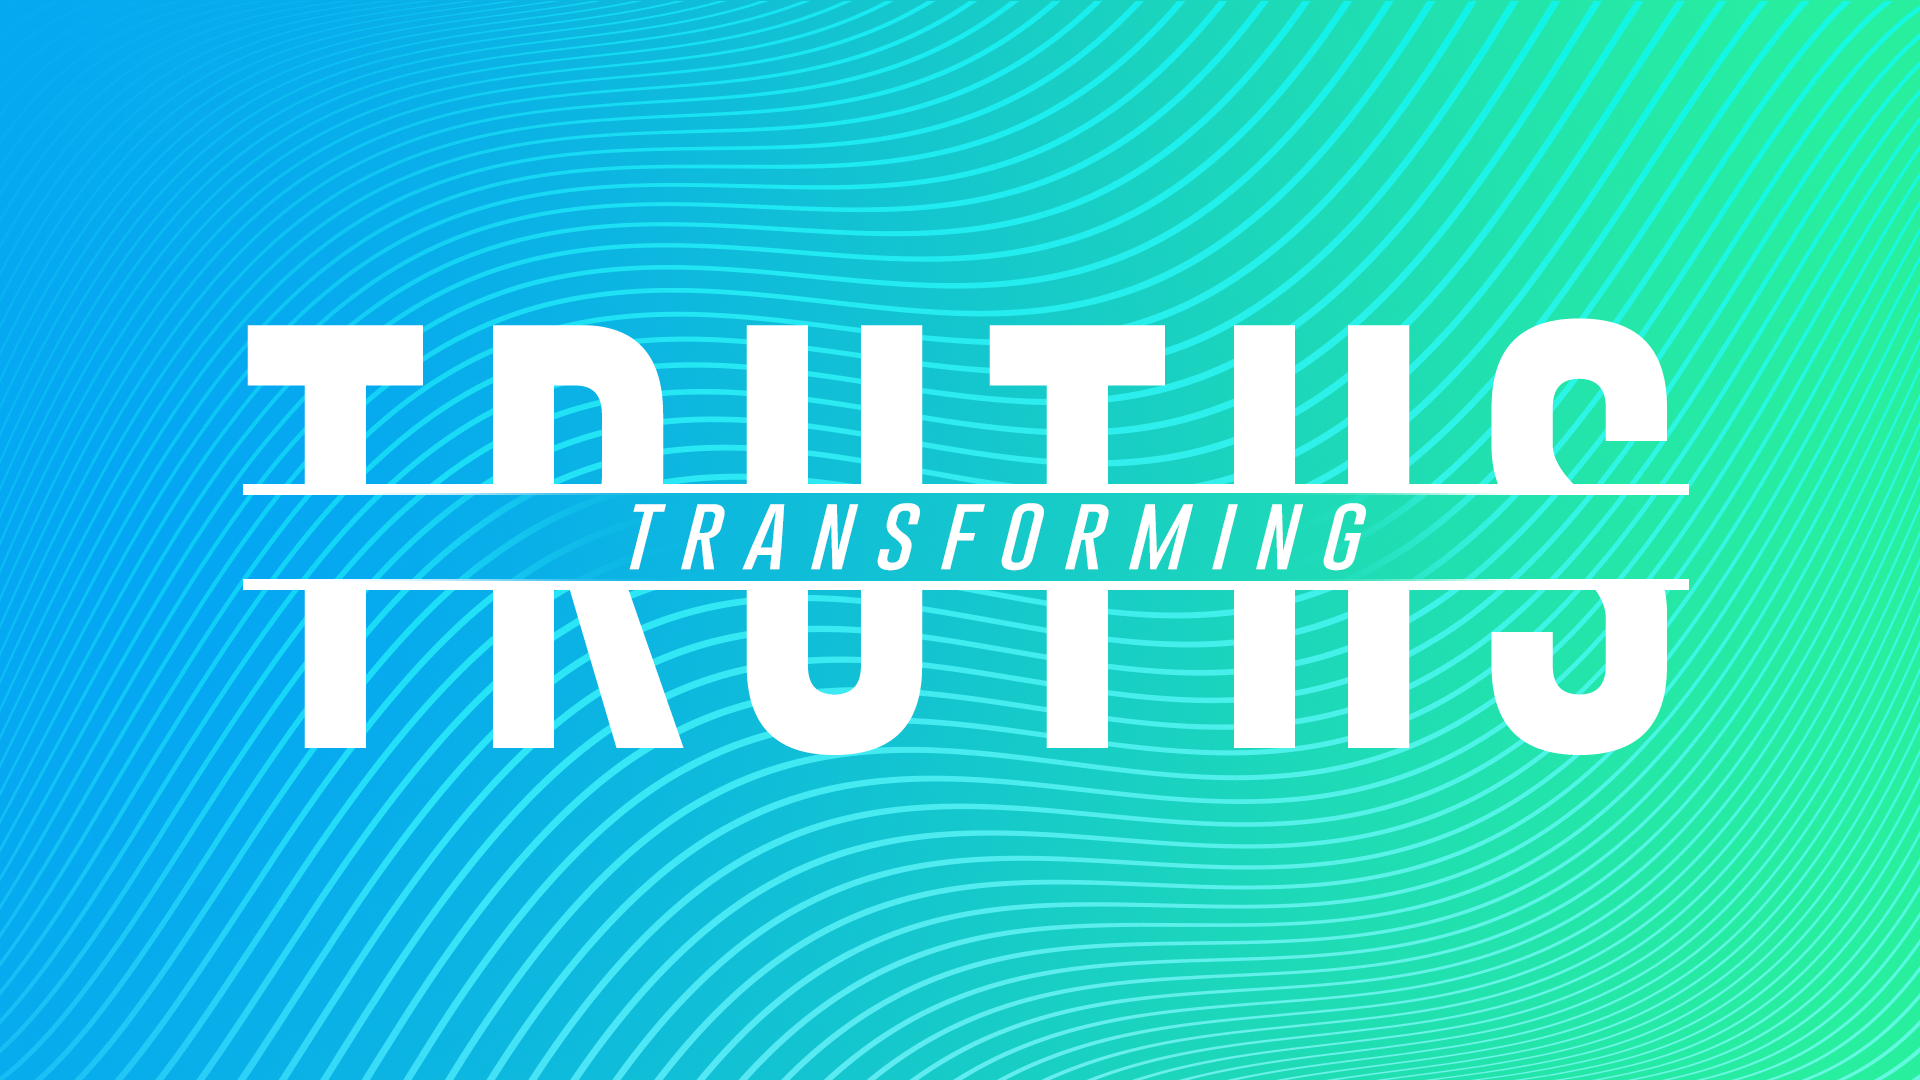 August 9, 2020 – Transforming Truths